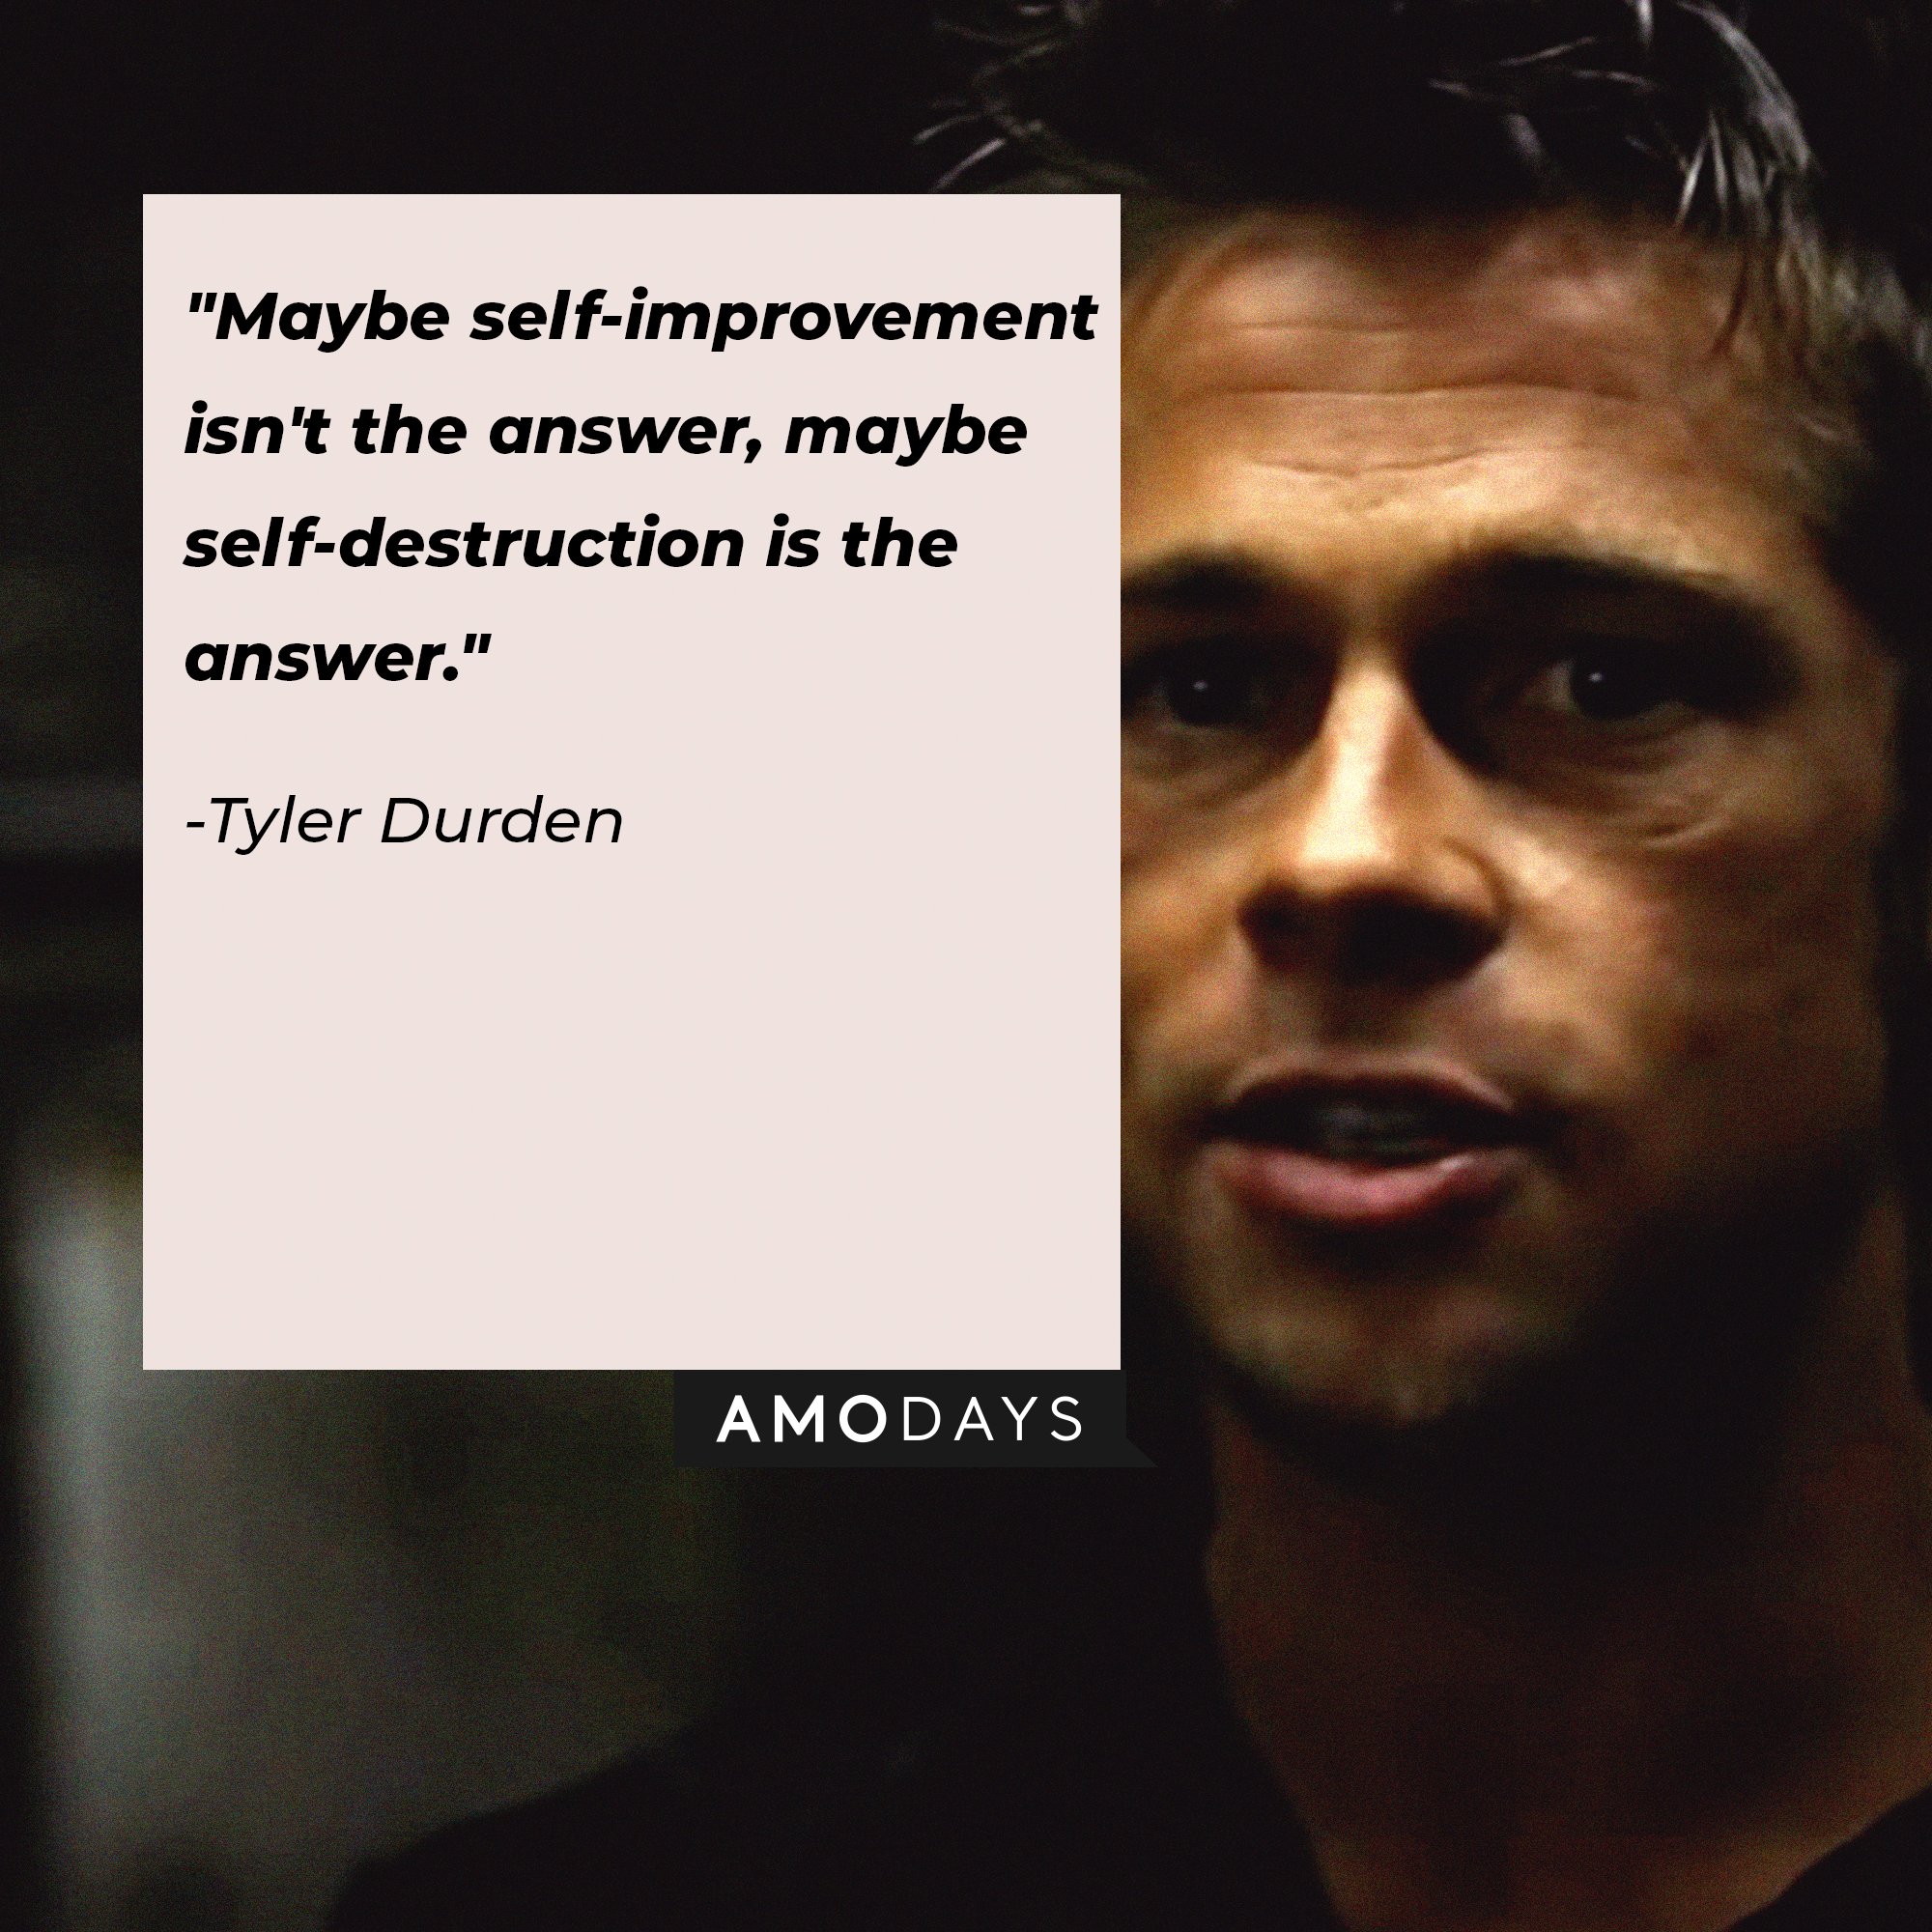 Tyler Durden's quote: "Maybe self-improvement isn't the answer, maybe self-destruction is the answer." | Image: AmoDays